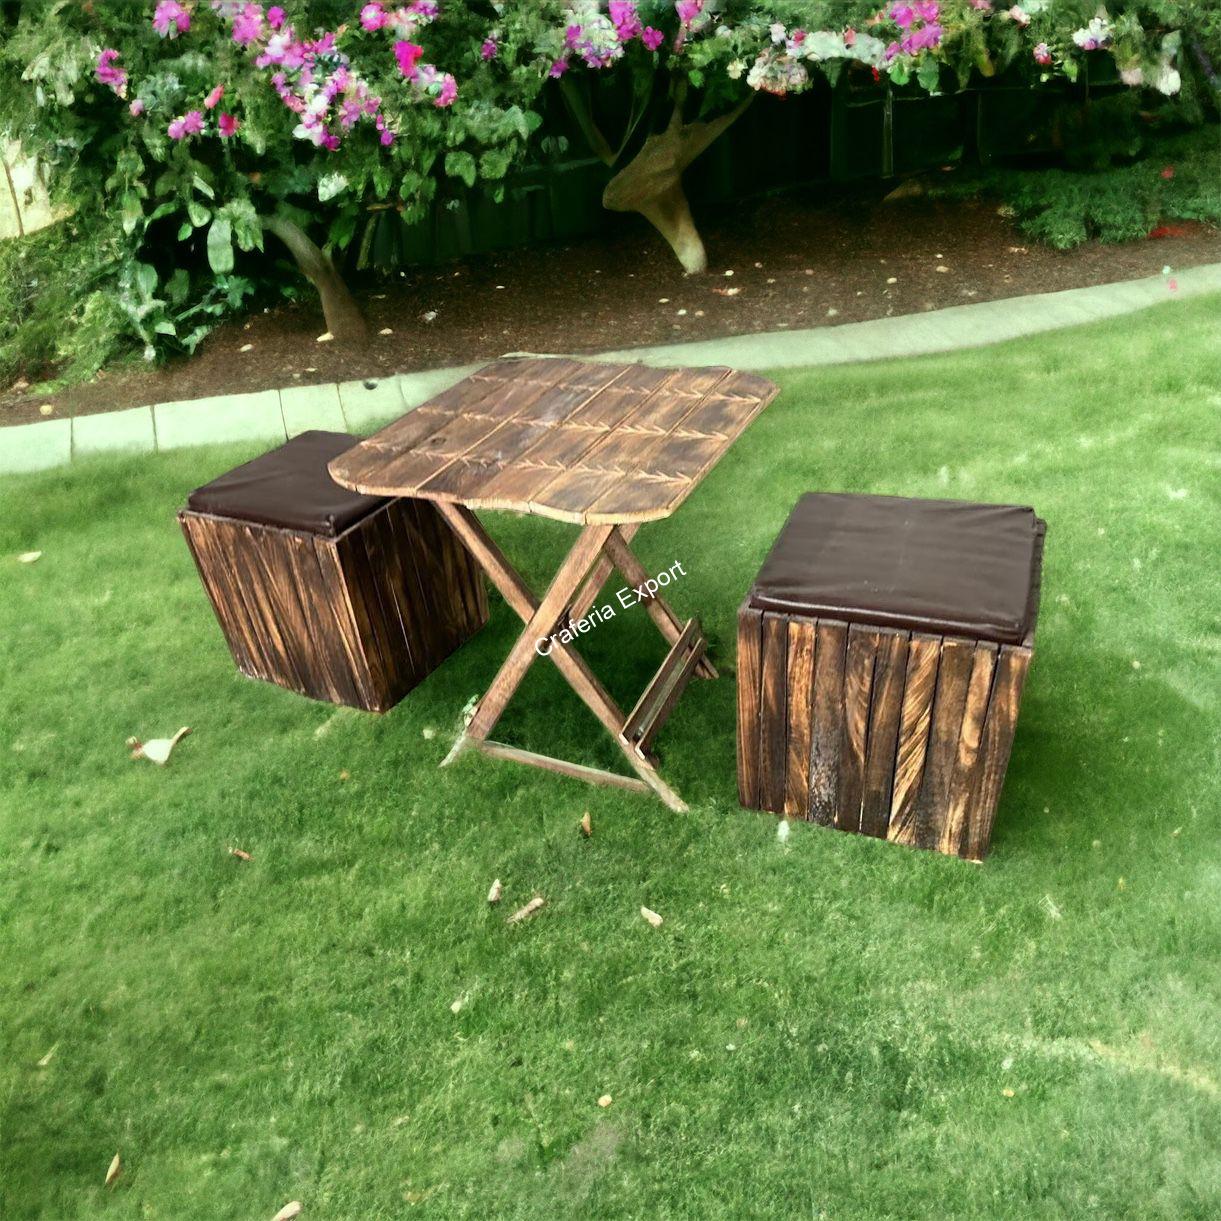 Wooden Stool And Table Natural Wood Logs Best Used as Bedside Tea Coffee Plants Table for Bedroom Living Room Outdoor Garden Light Weight Table